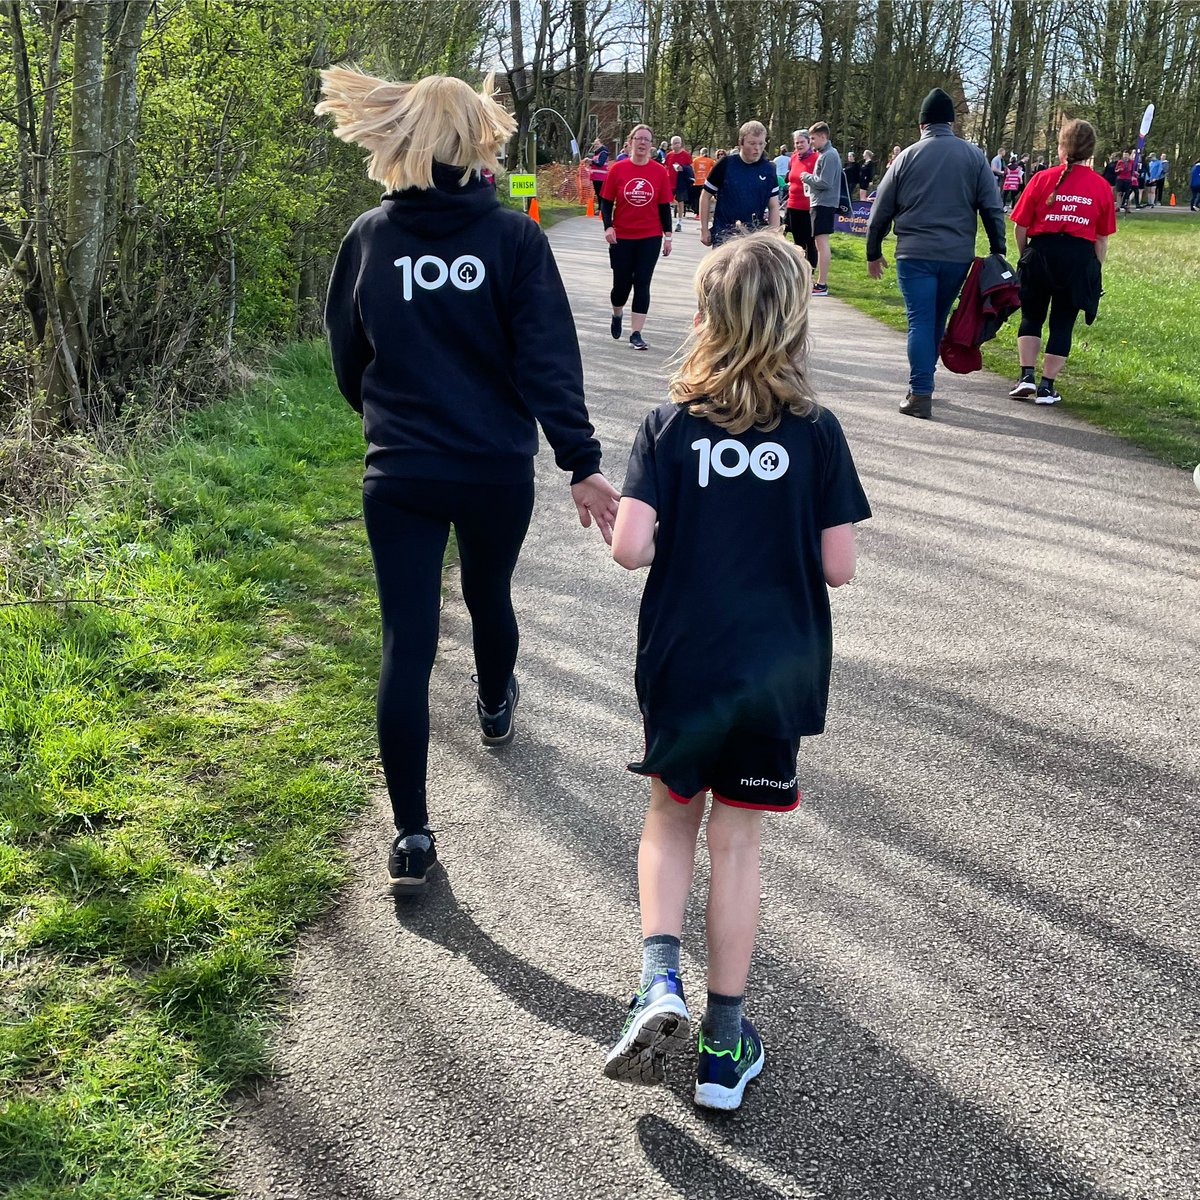 A new member of the 100 Club - so proud of my friend who has now reached this milestone, all whilst park-walking. My little buddy ran back to join his mum and celebrate her finish. parkrun is for everyone 🧡 #100club #loveparkrun